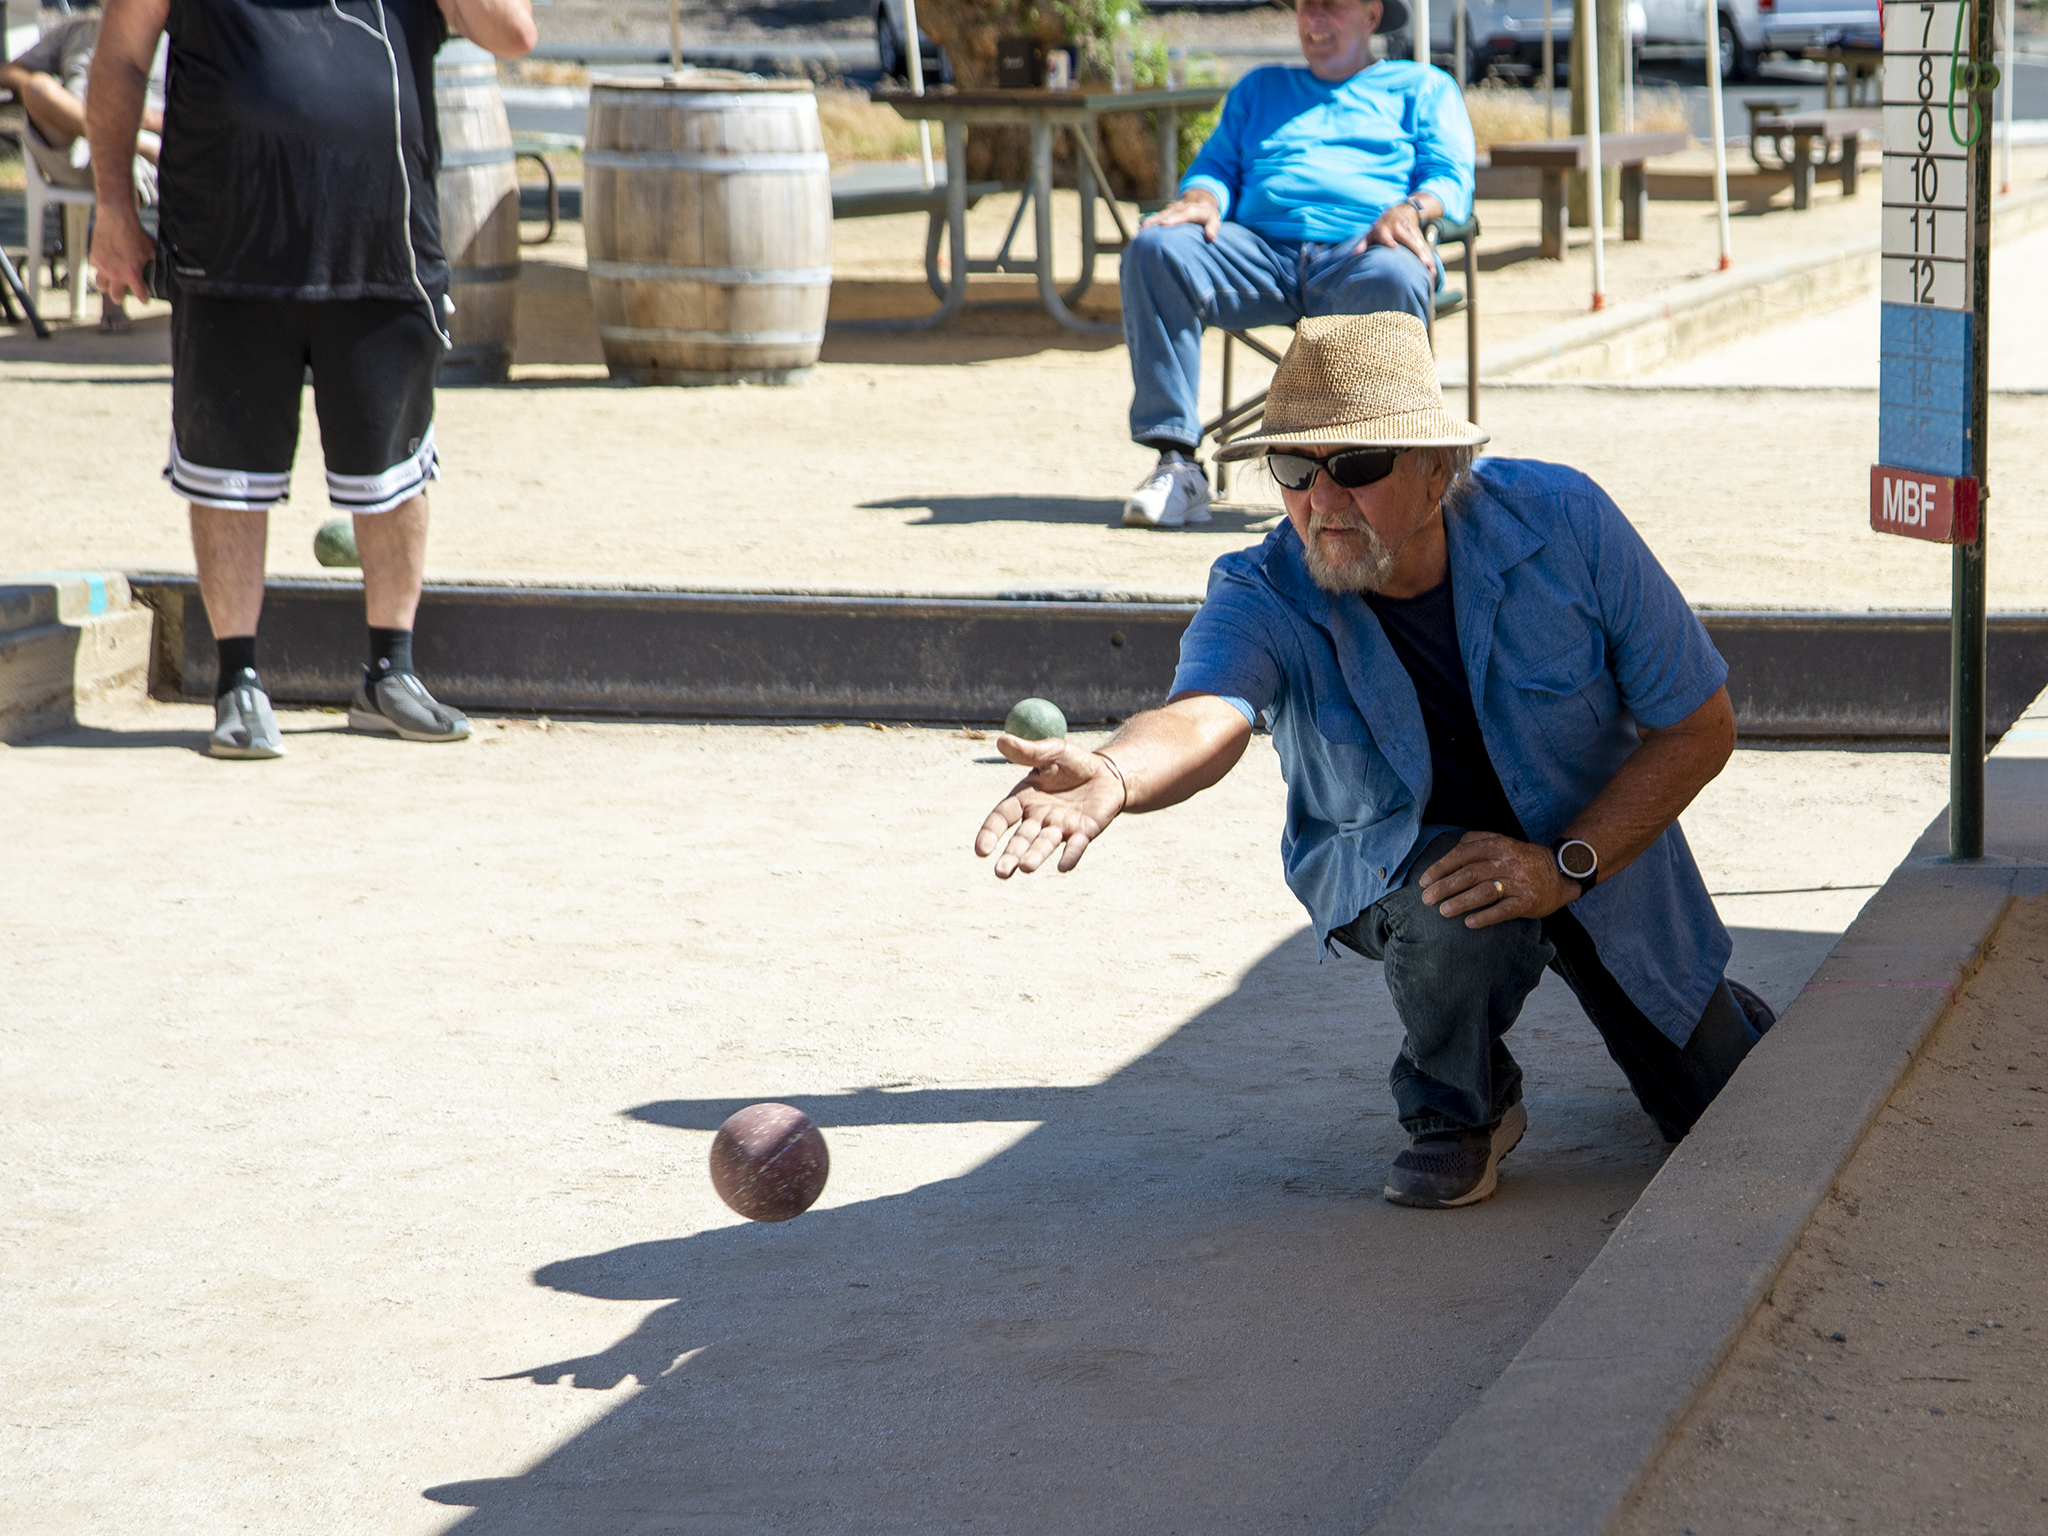 Bocce ball player rolling a bocce ball